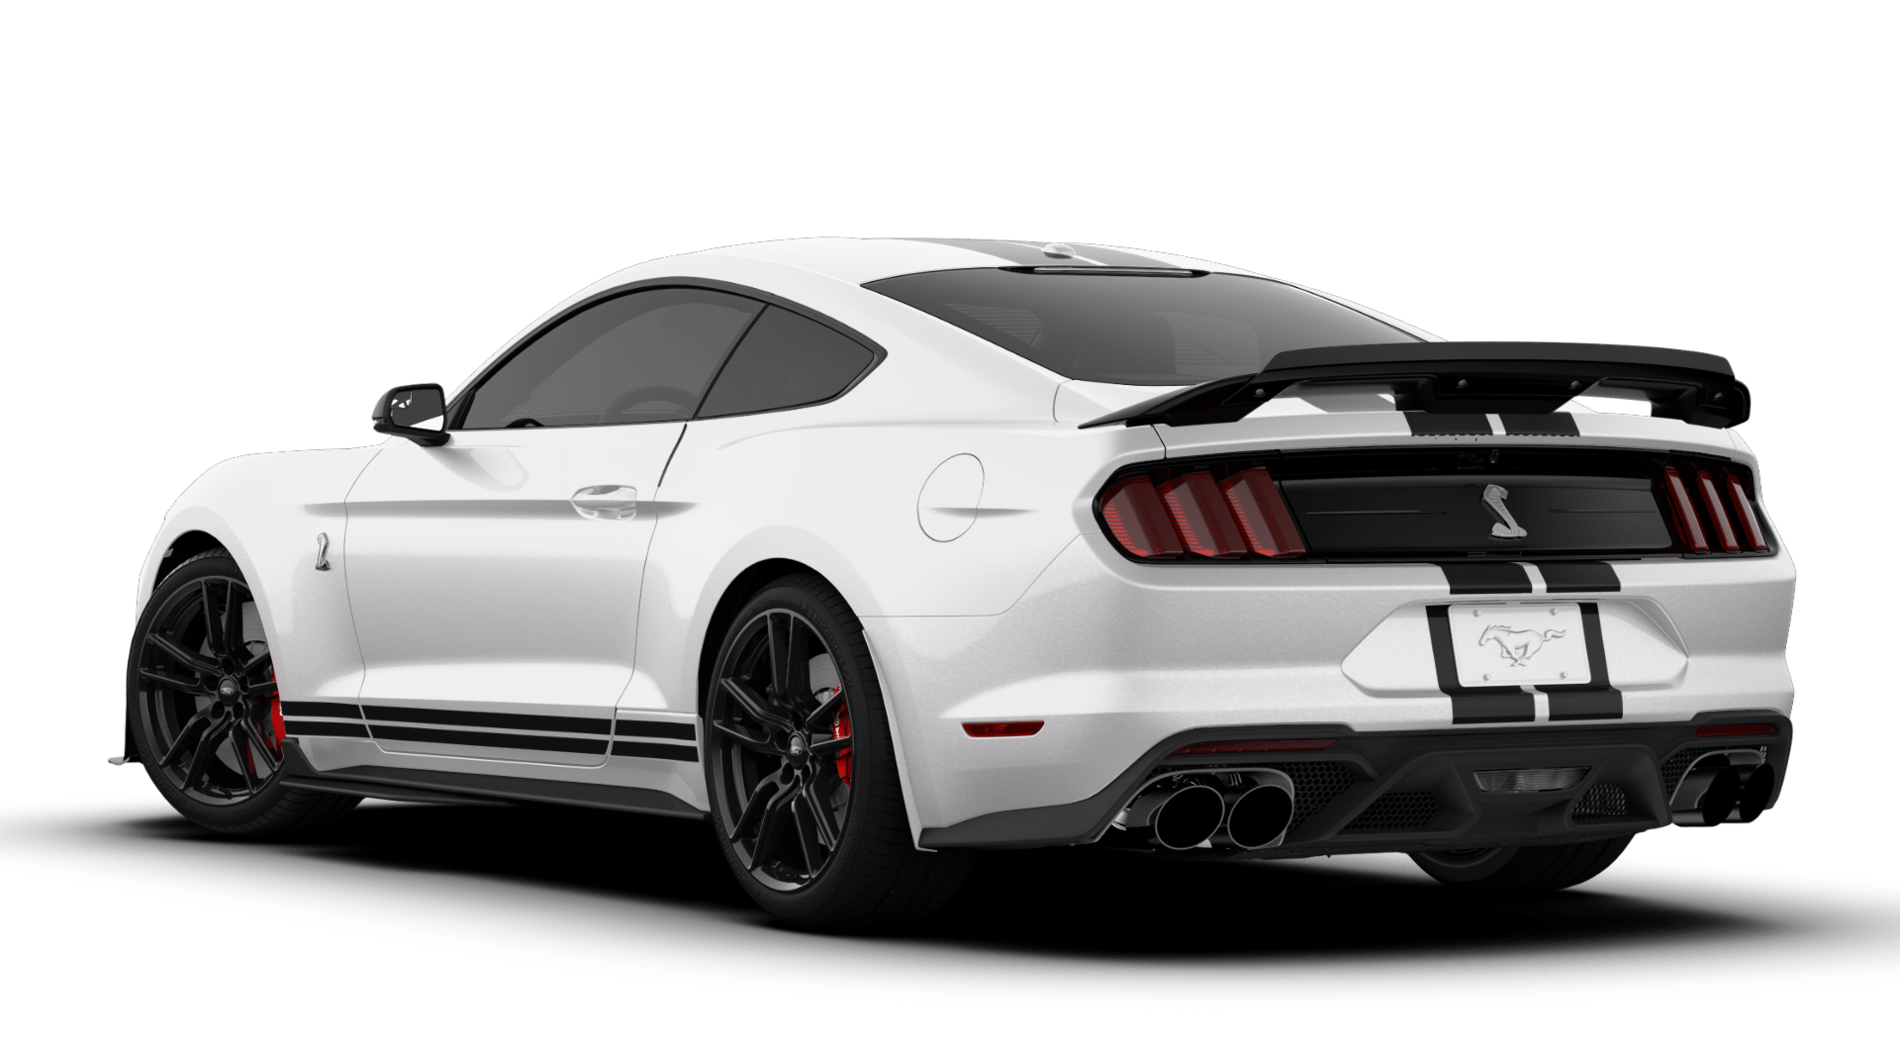 Oxford White GT500 pictures | Page 2 | 2015+ S550 Mustang Forum (GT ...